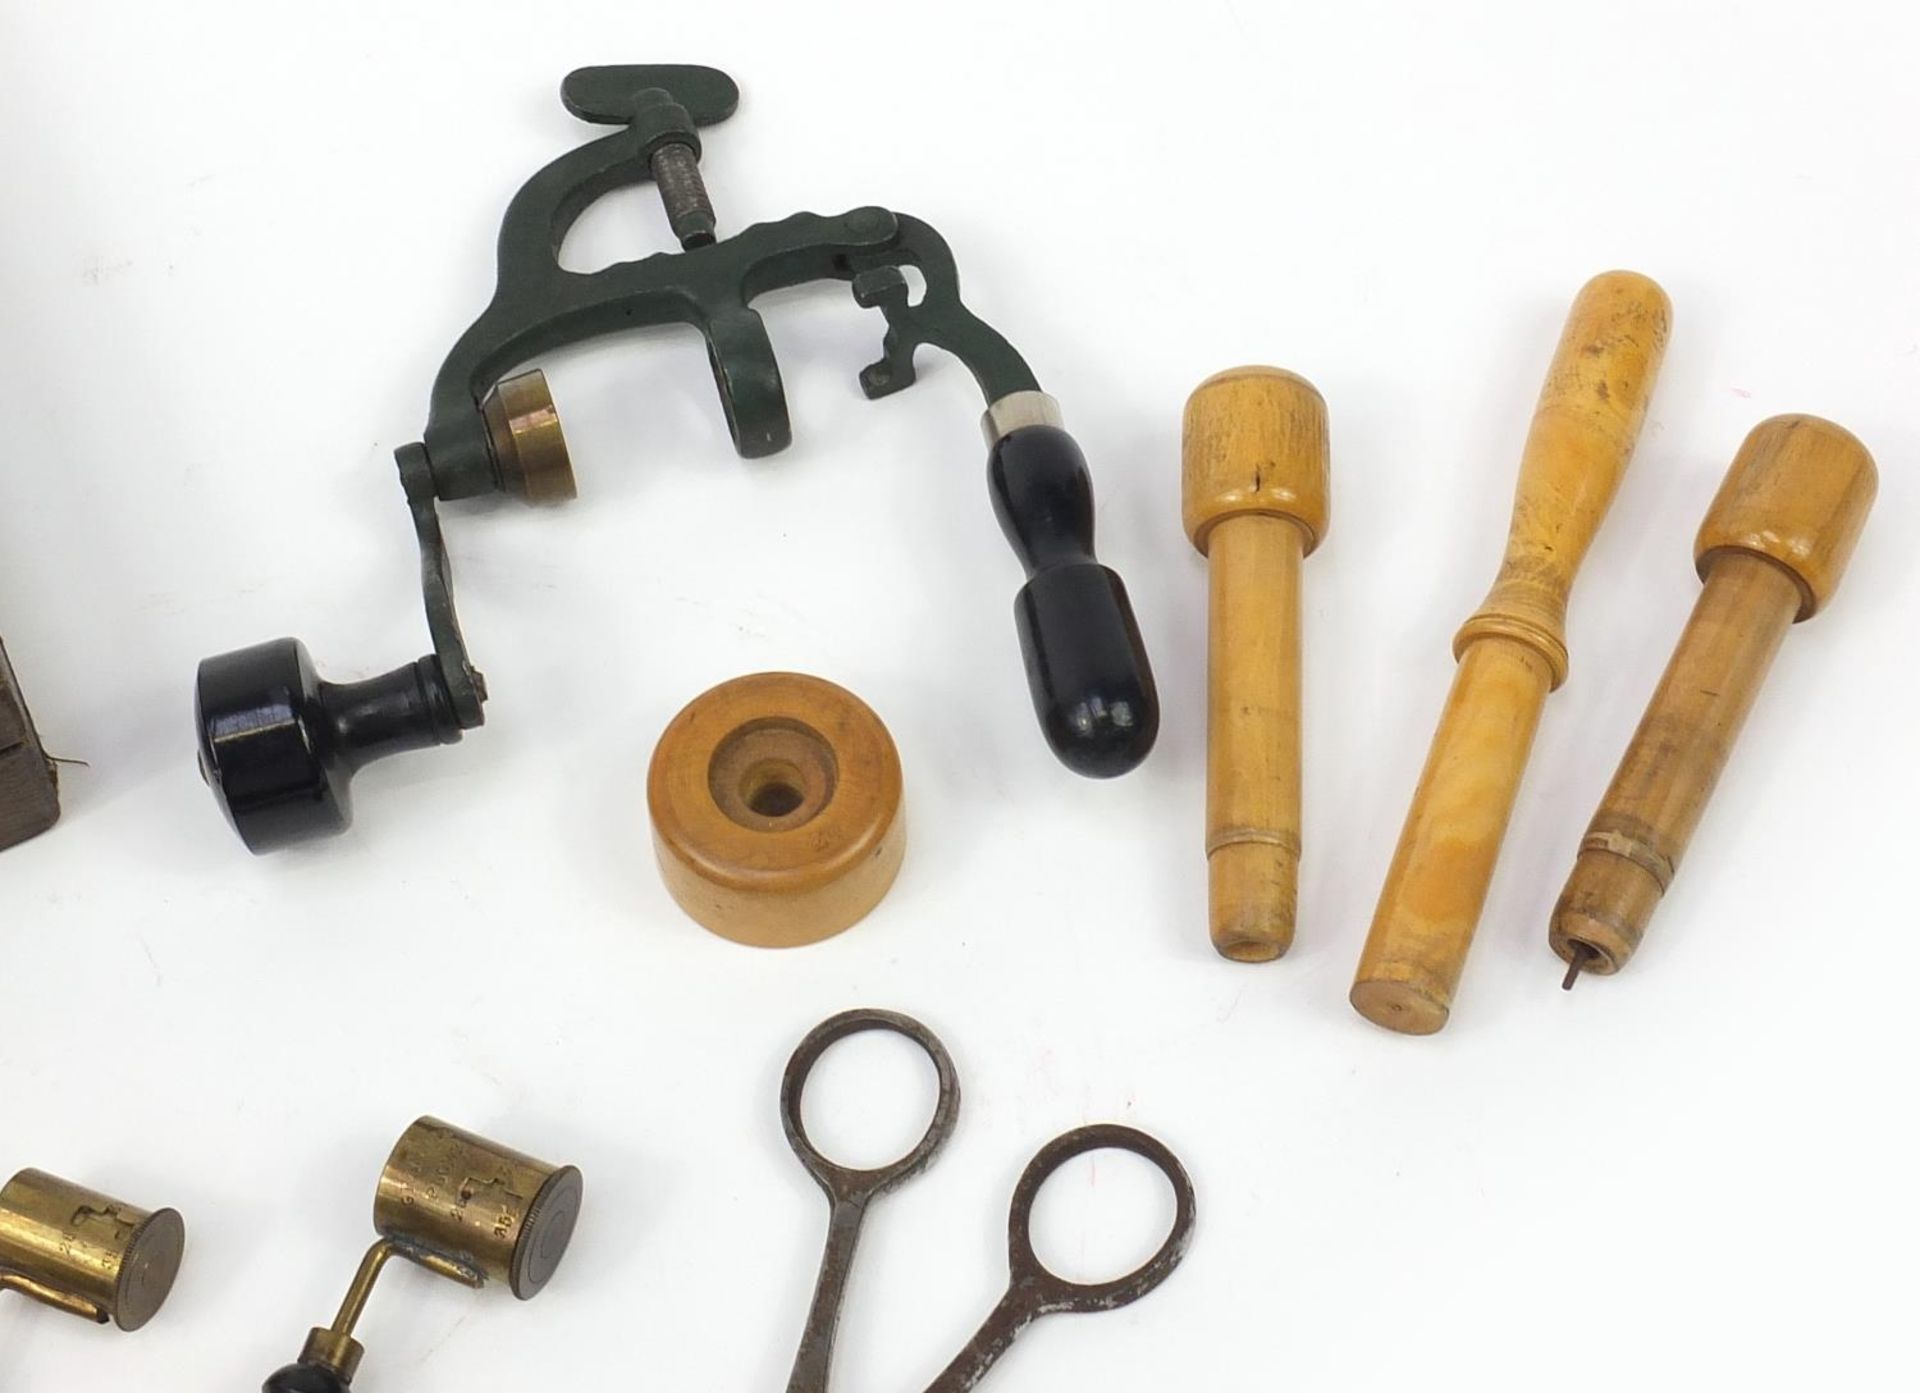 Antique gun ammunition making equipment including a cartridge maker, clamps and scissors housed in a - Bild 2 aus 5